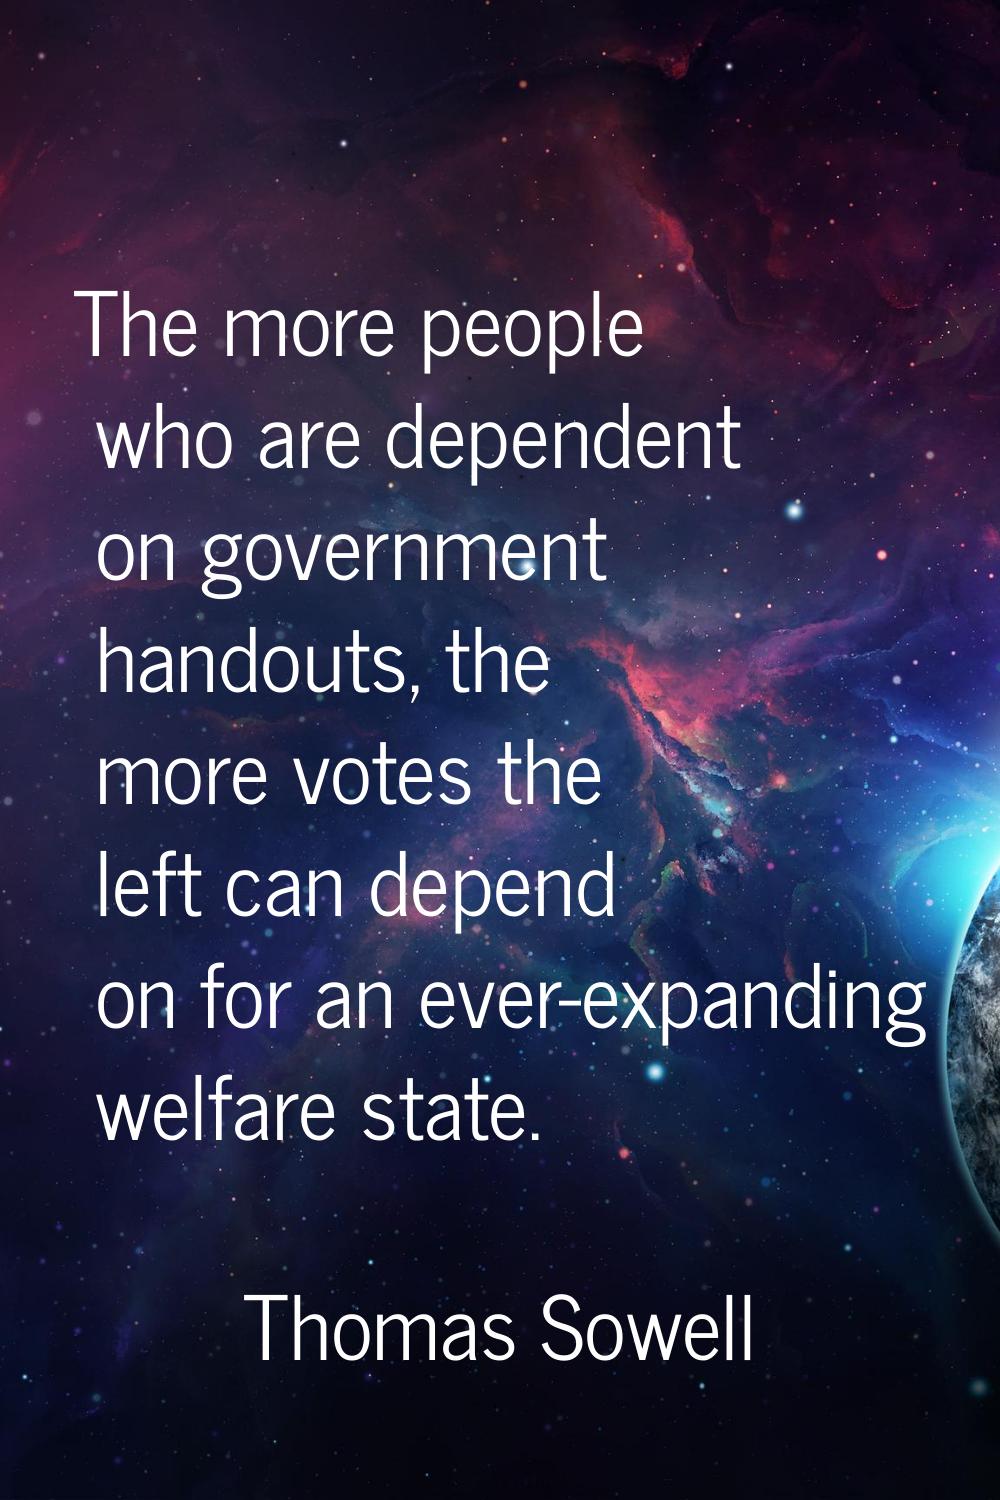 The more people who are dependent on government handouts, the more votes the left can depend on for